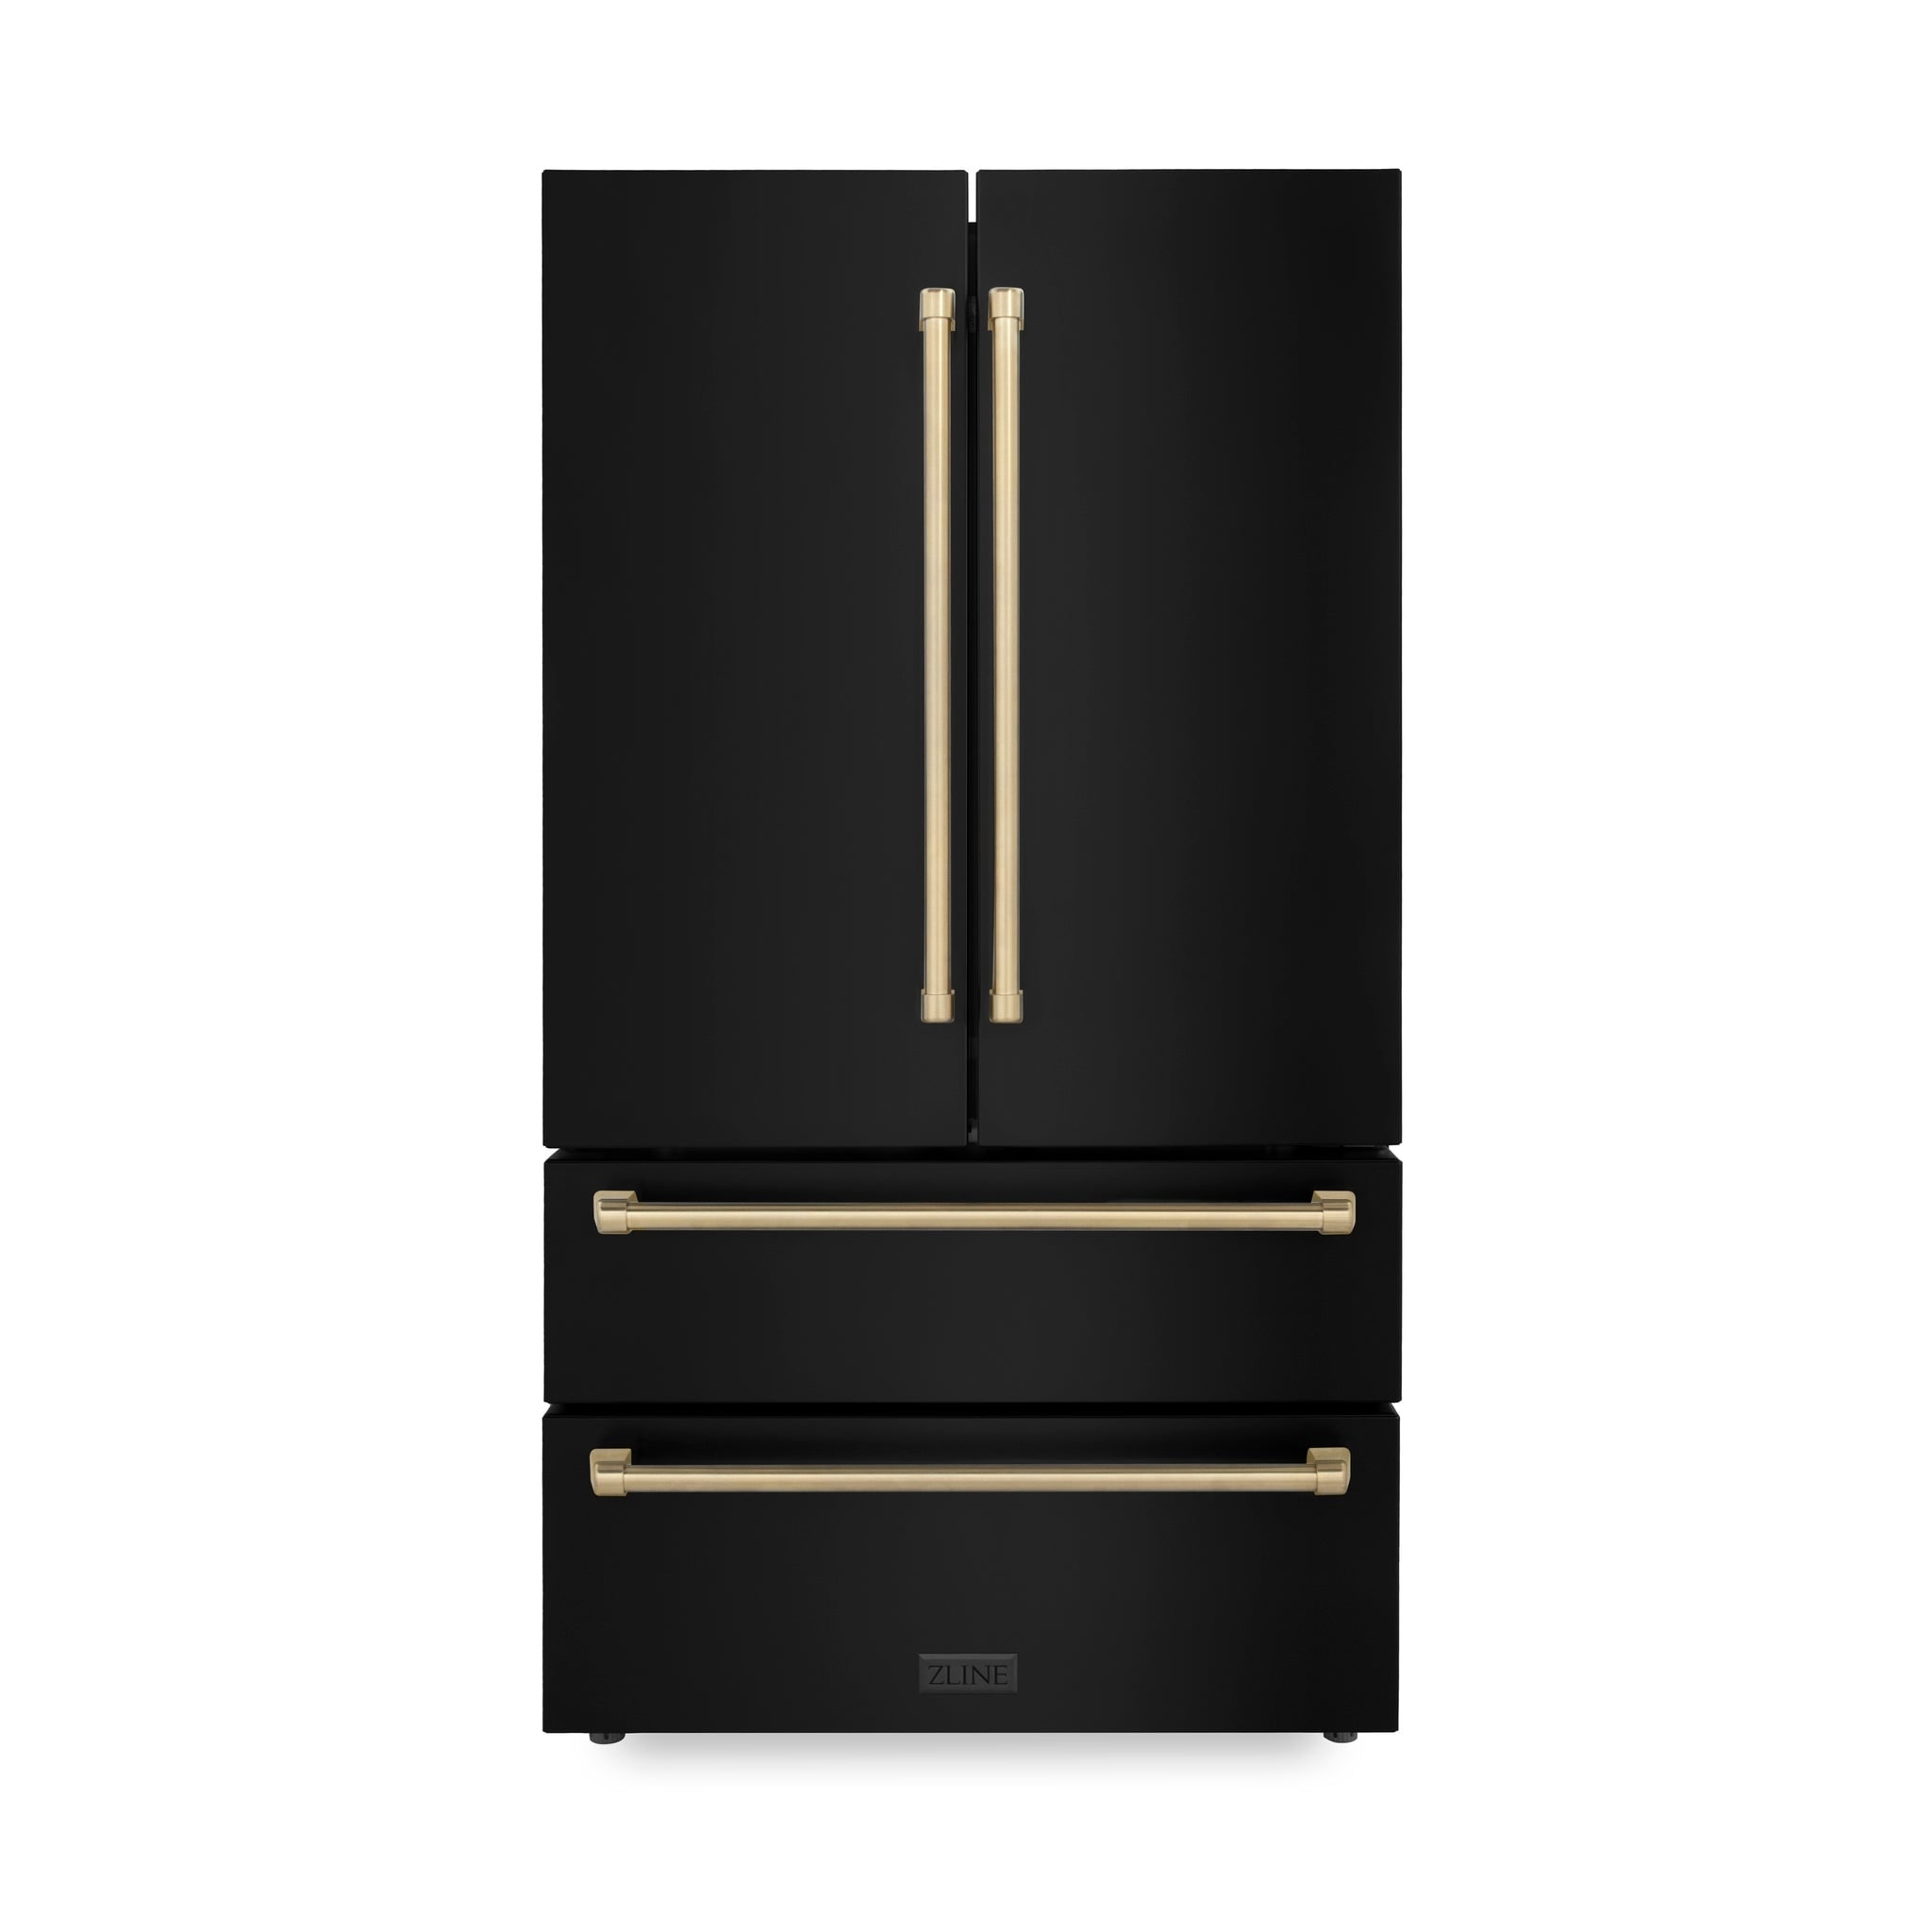 Zline Kitchen and Bath ZLINE 36" Autograph Edition Freestanding Refrigerator with Ice Maker in Black Stainless Steel with Accents Option 1